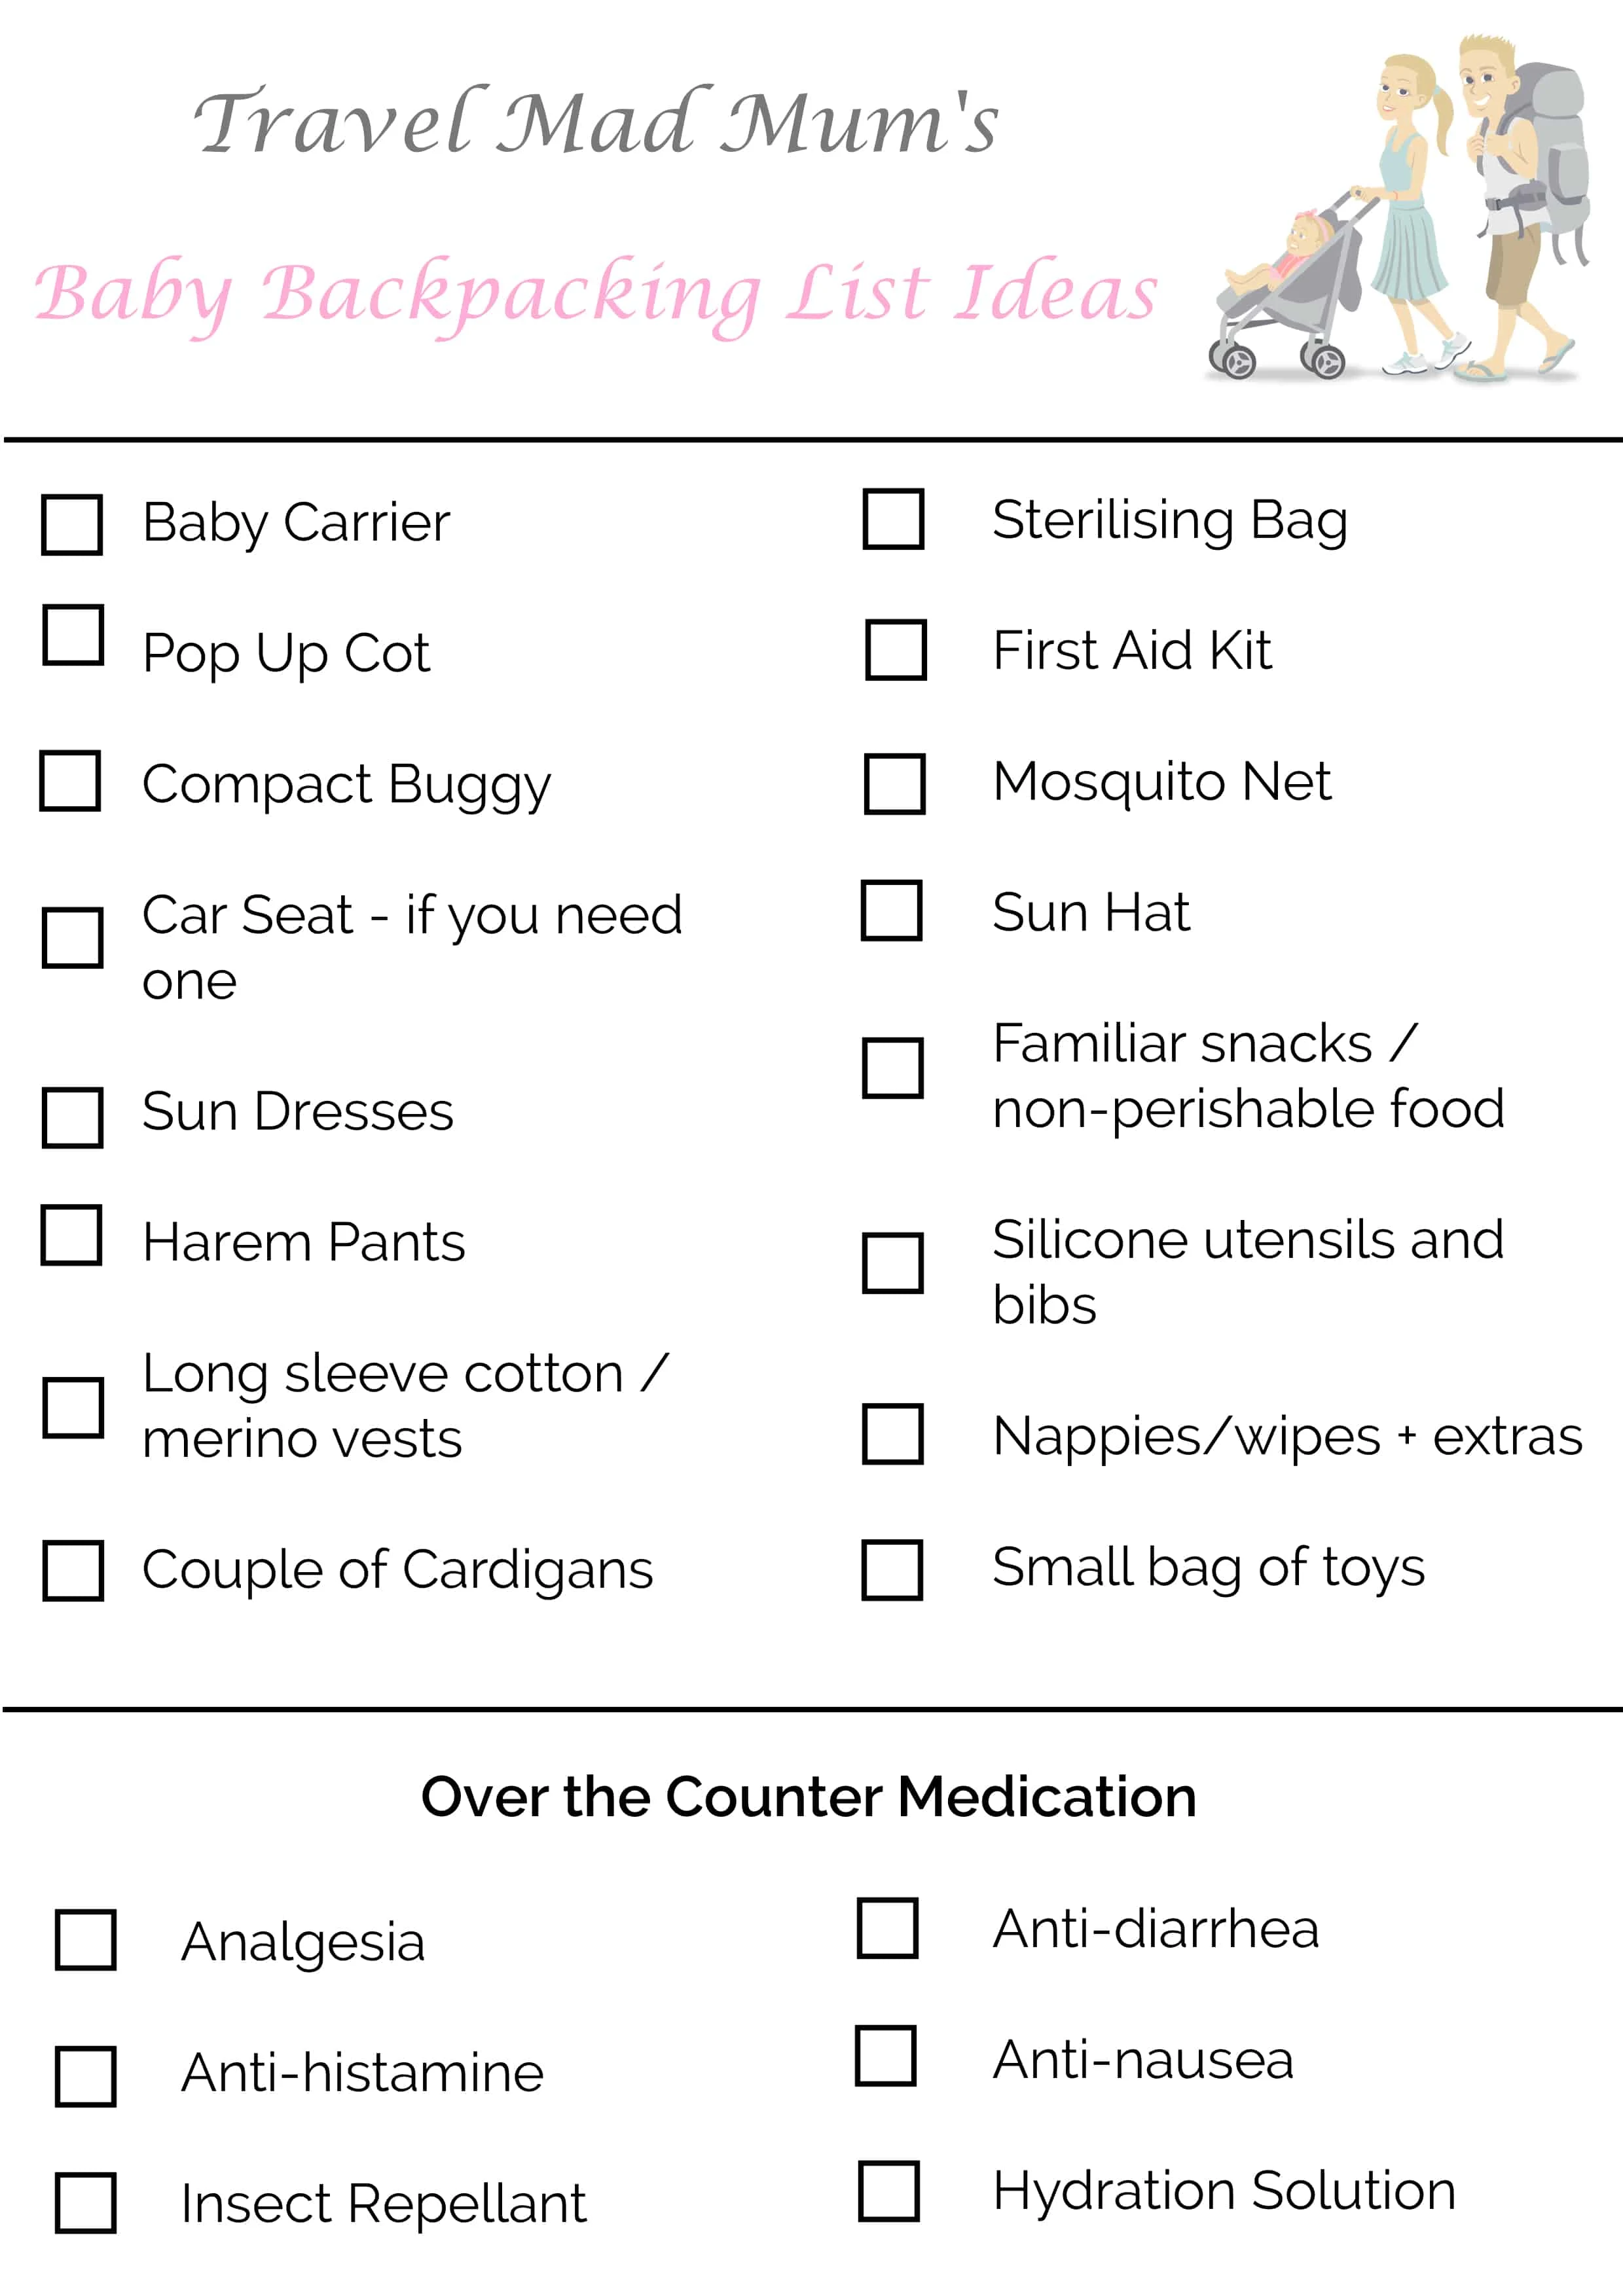 Backpacking with a baby - Baby Packing List